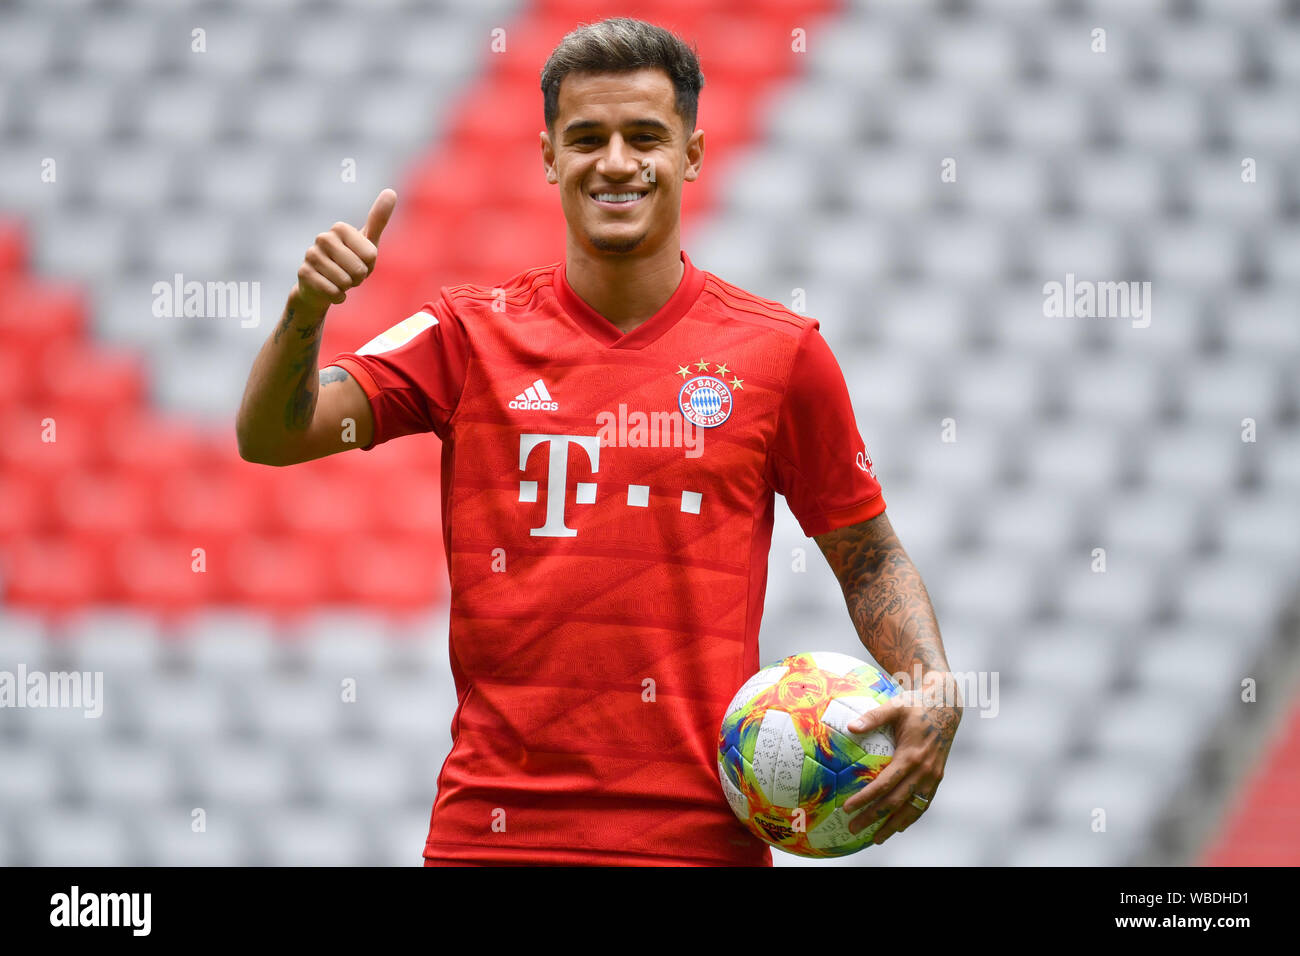 Munich, Deutschland. 19th Aug, 2019. Philippe COUTINHO (Bayern Munich)  wearing a jersey, posing in the stadium. thumb up, thumbs up. Action,  single image, single cut motif, half figure, half figure, official  performance,